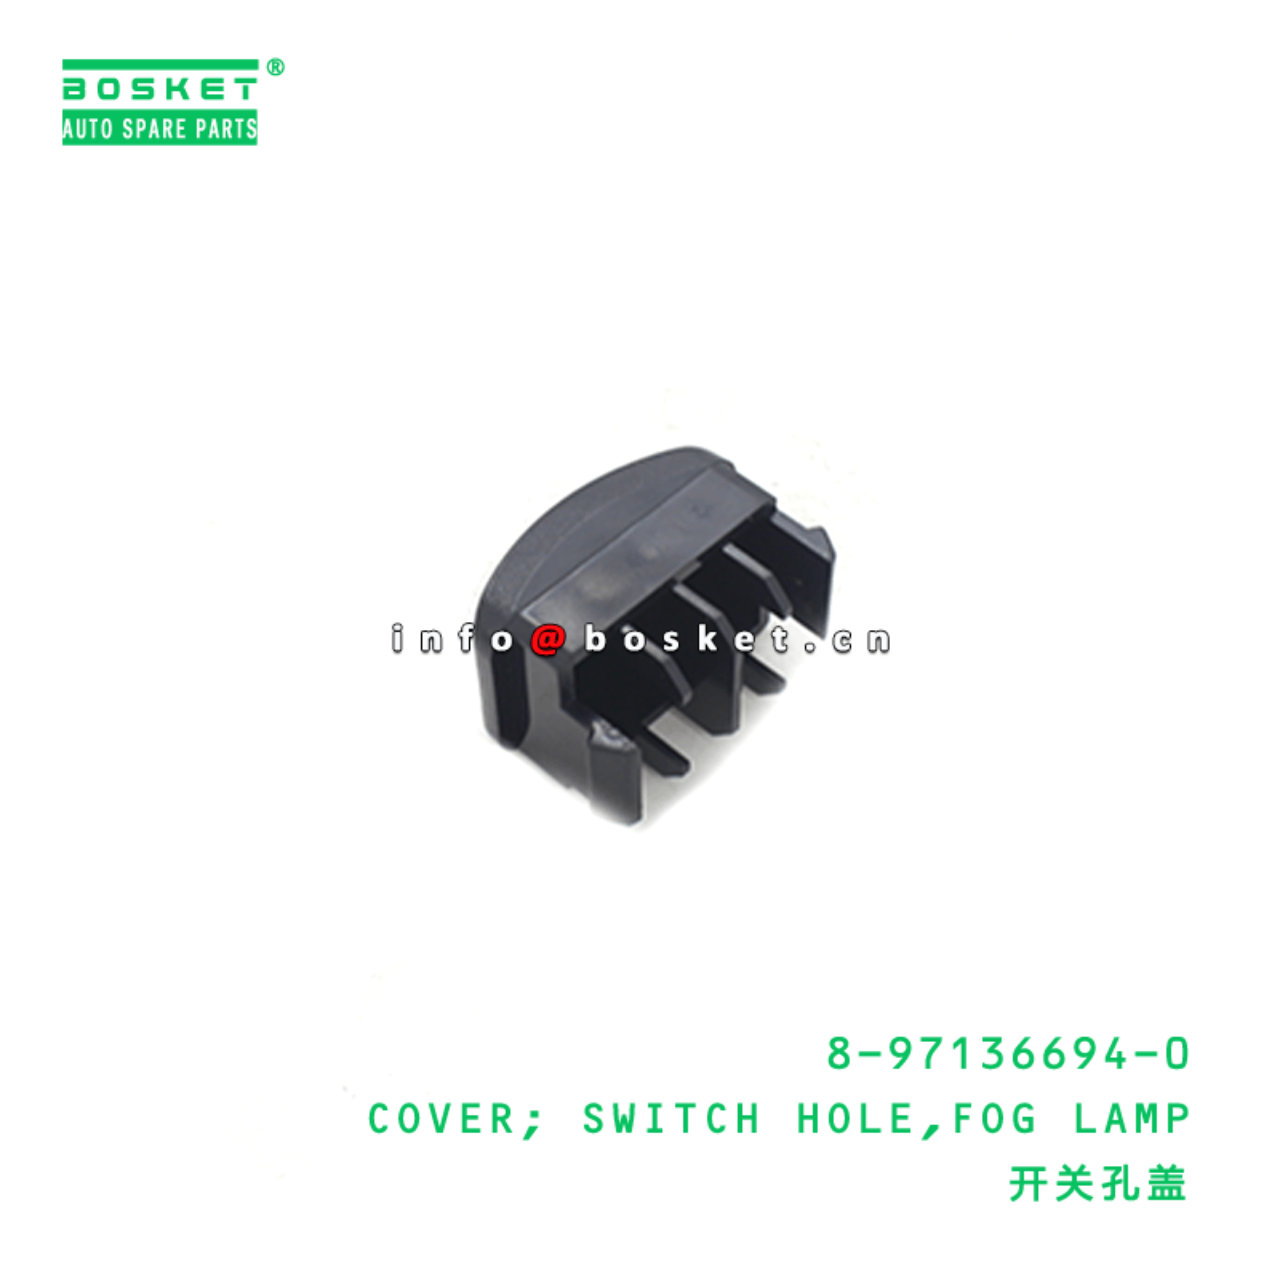  8-97136694-0 Fog Lamp Switch Hole Cover 8971366940 Suitable for ISUZU NKR